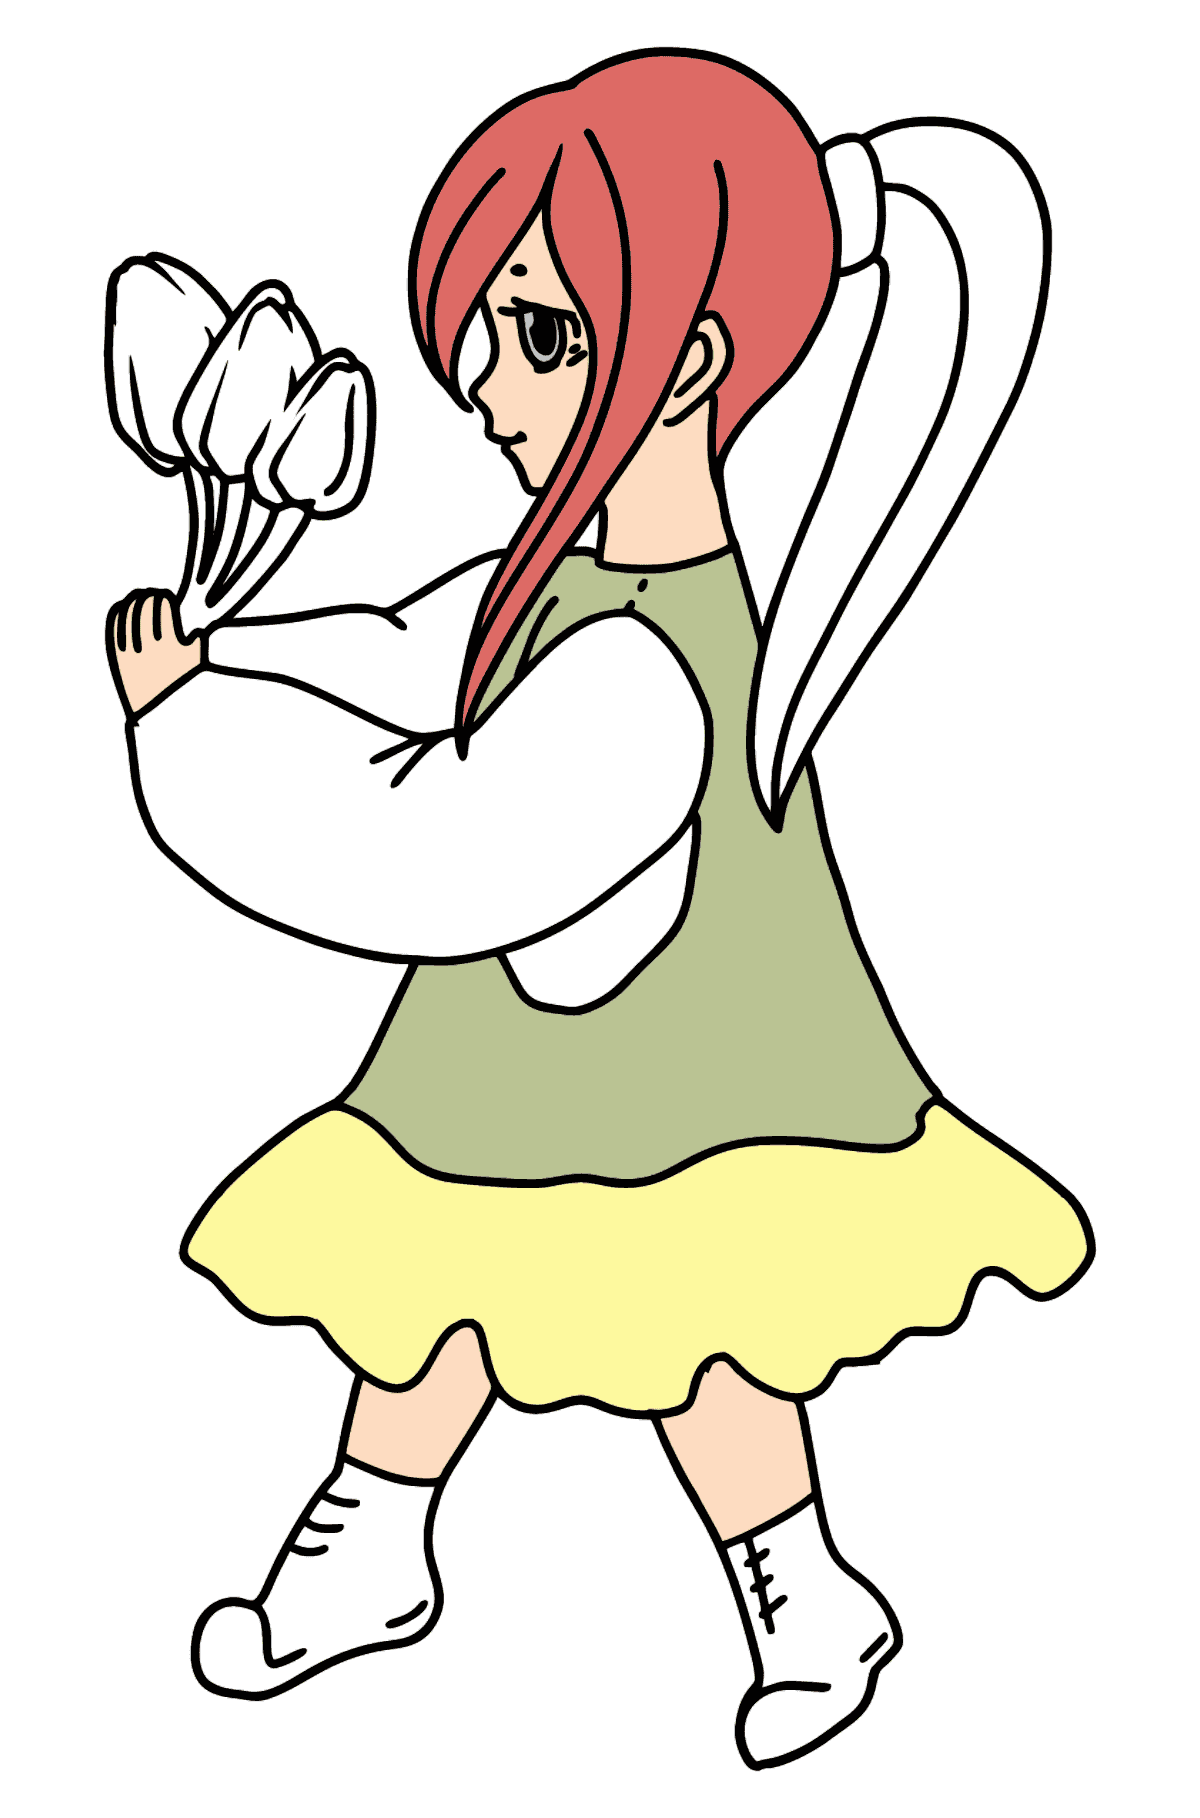 Anime Girl with Flowers coloring page - Coloring Pages for Kids